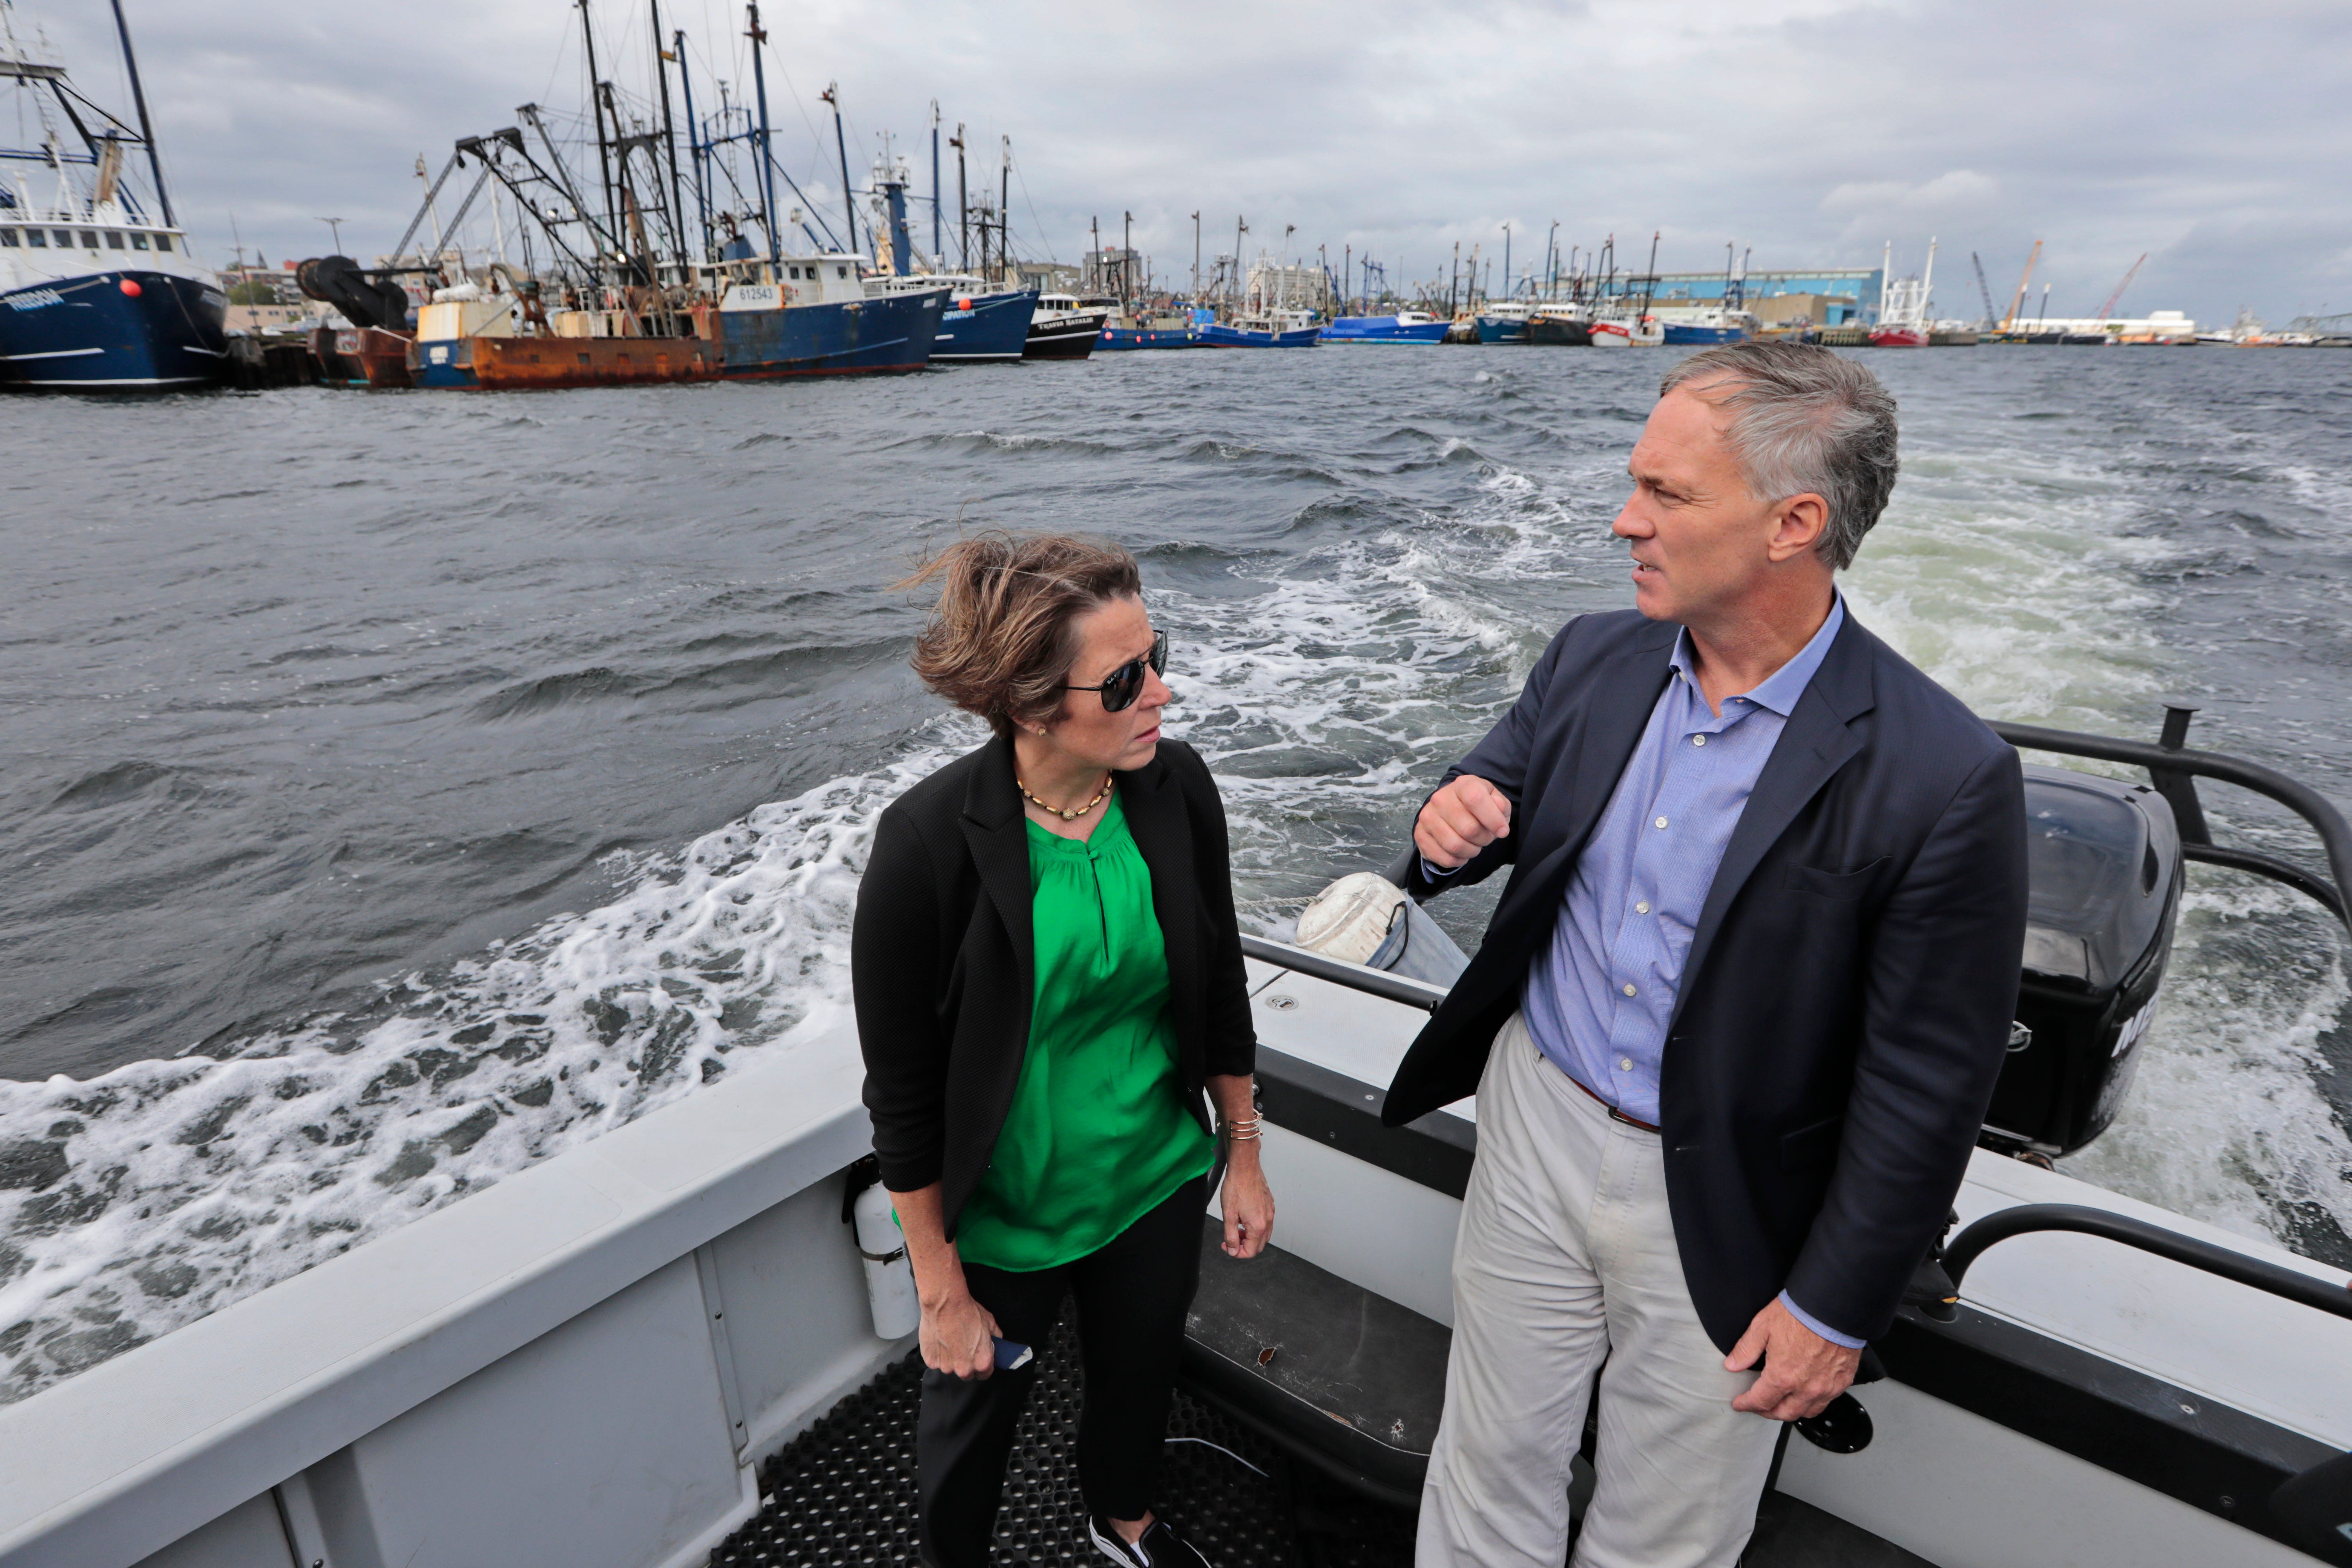 New Bedford Mayor Jon Mitchell speaks with Massachusetts Attorney General Maura Healey during a tour on New Bedford Harbor.